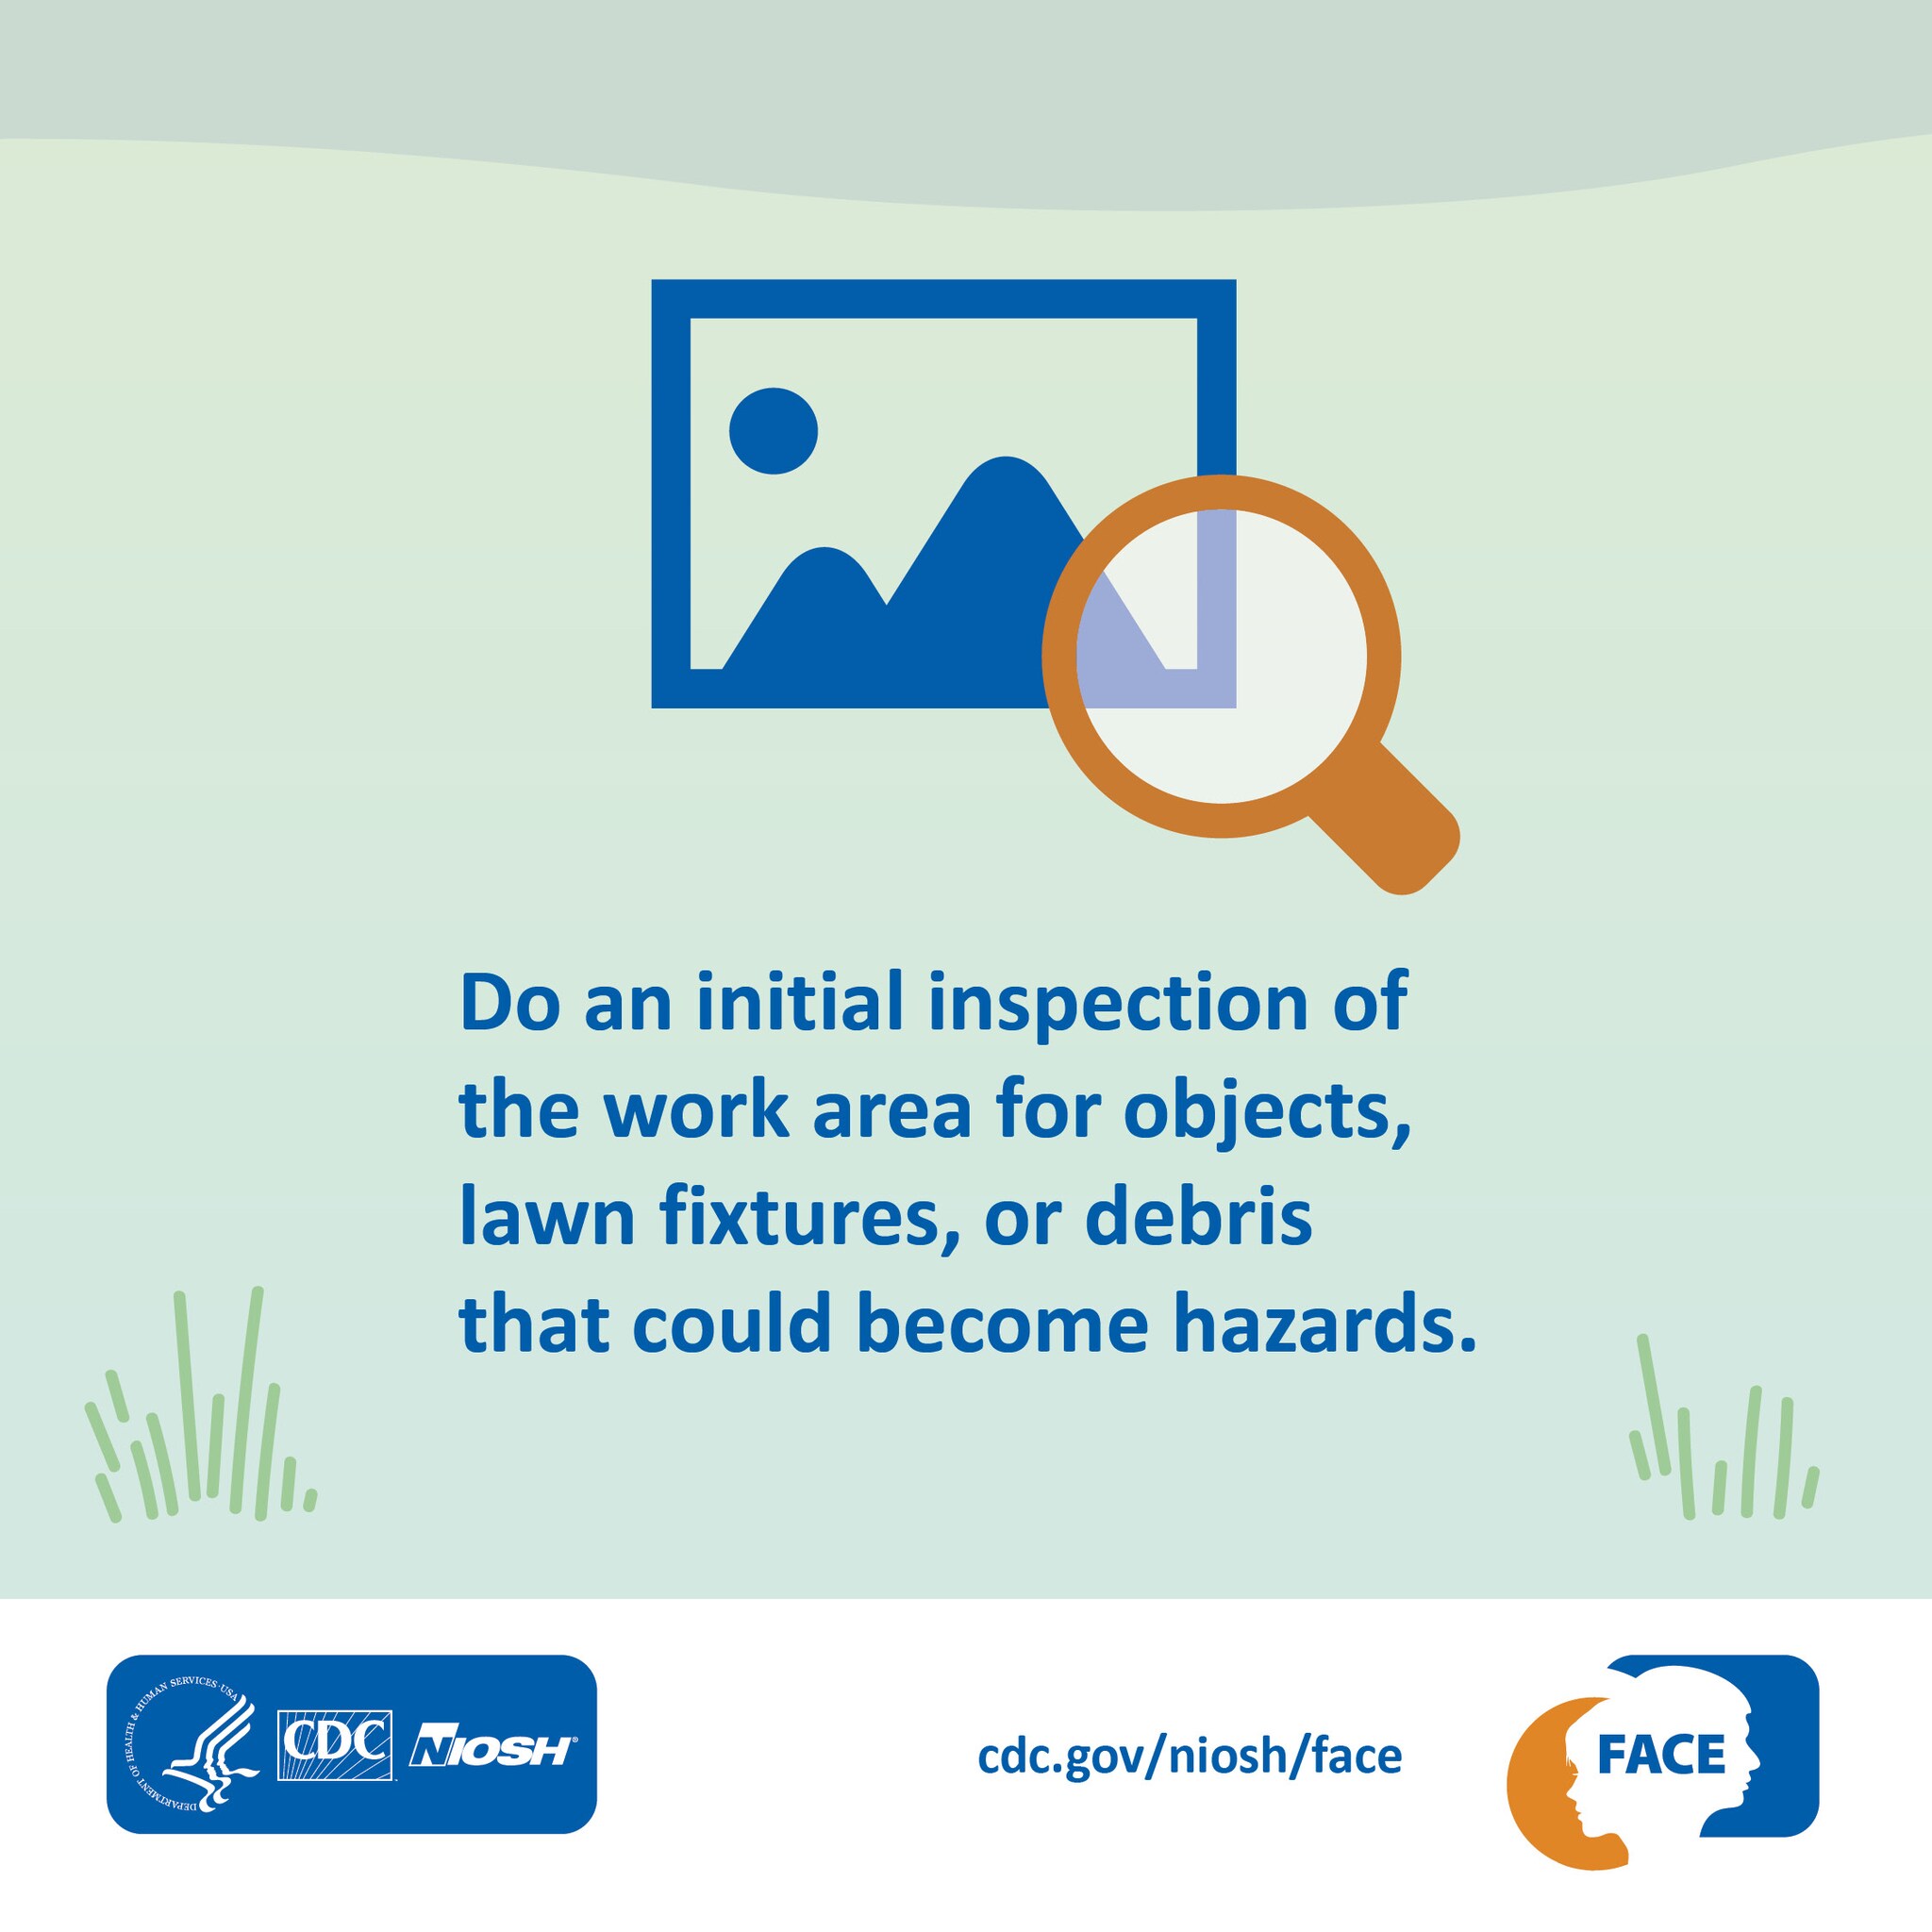 Do an initial inspection of the work area for objects, lawn fixtures, or debris that could become hazards.